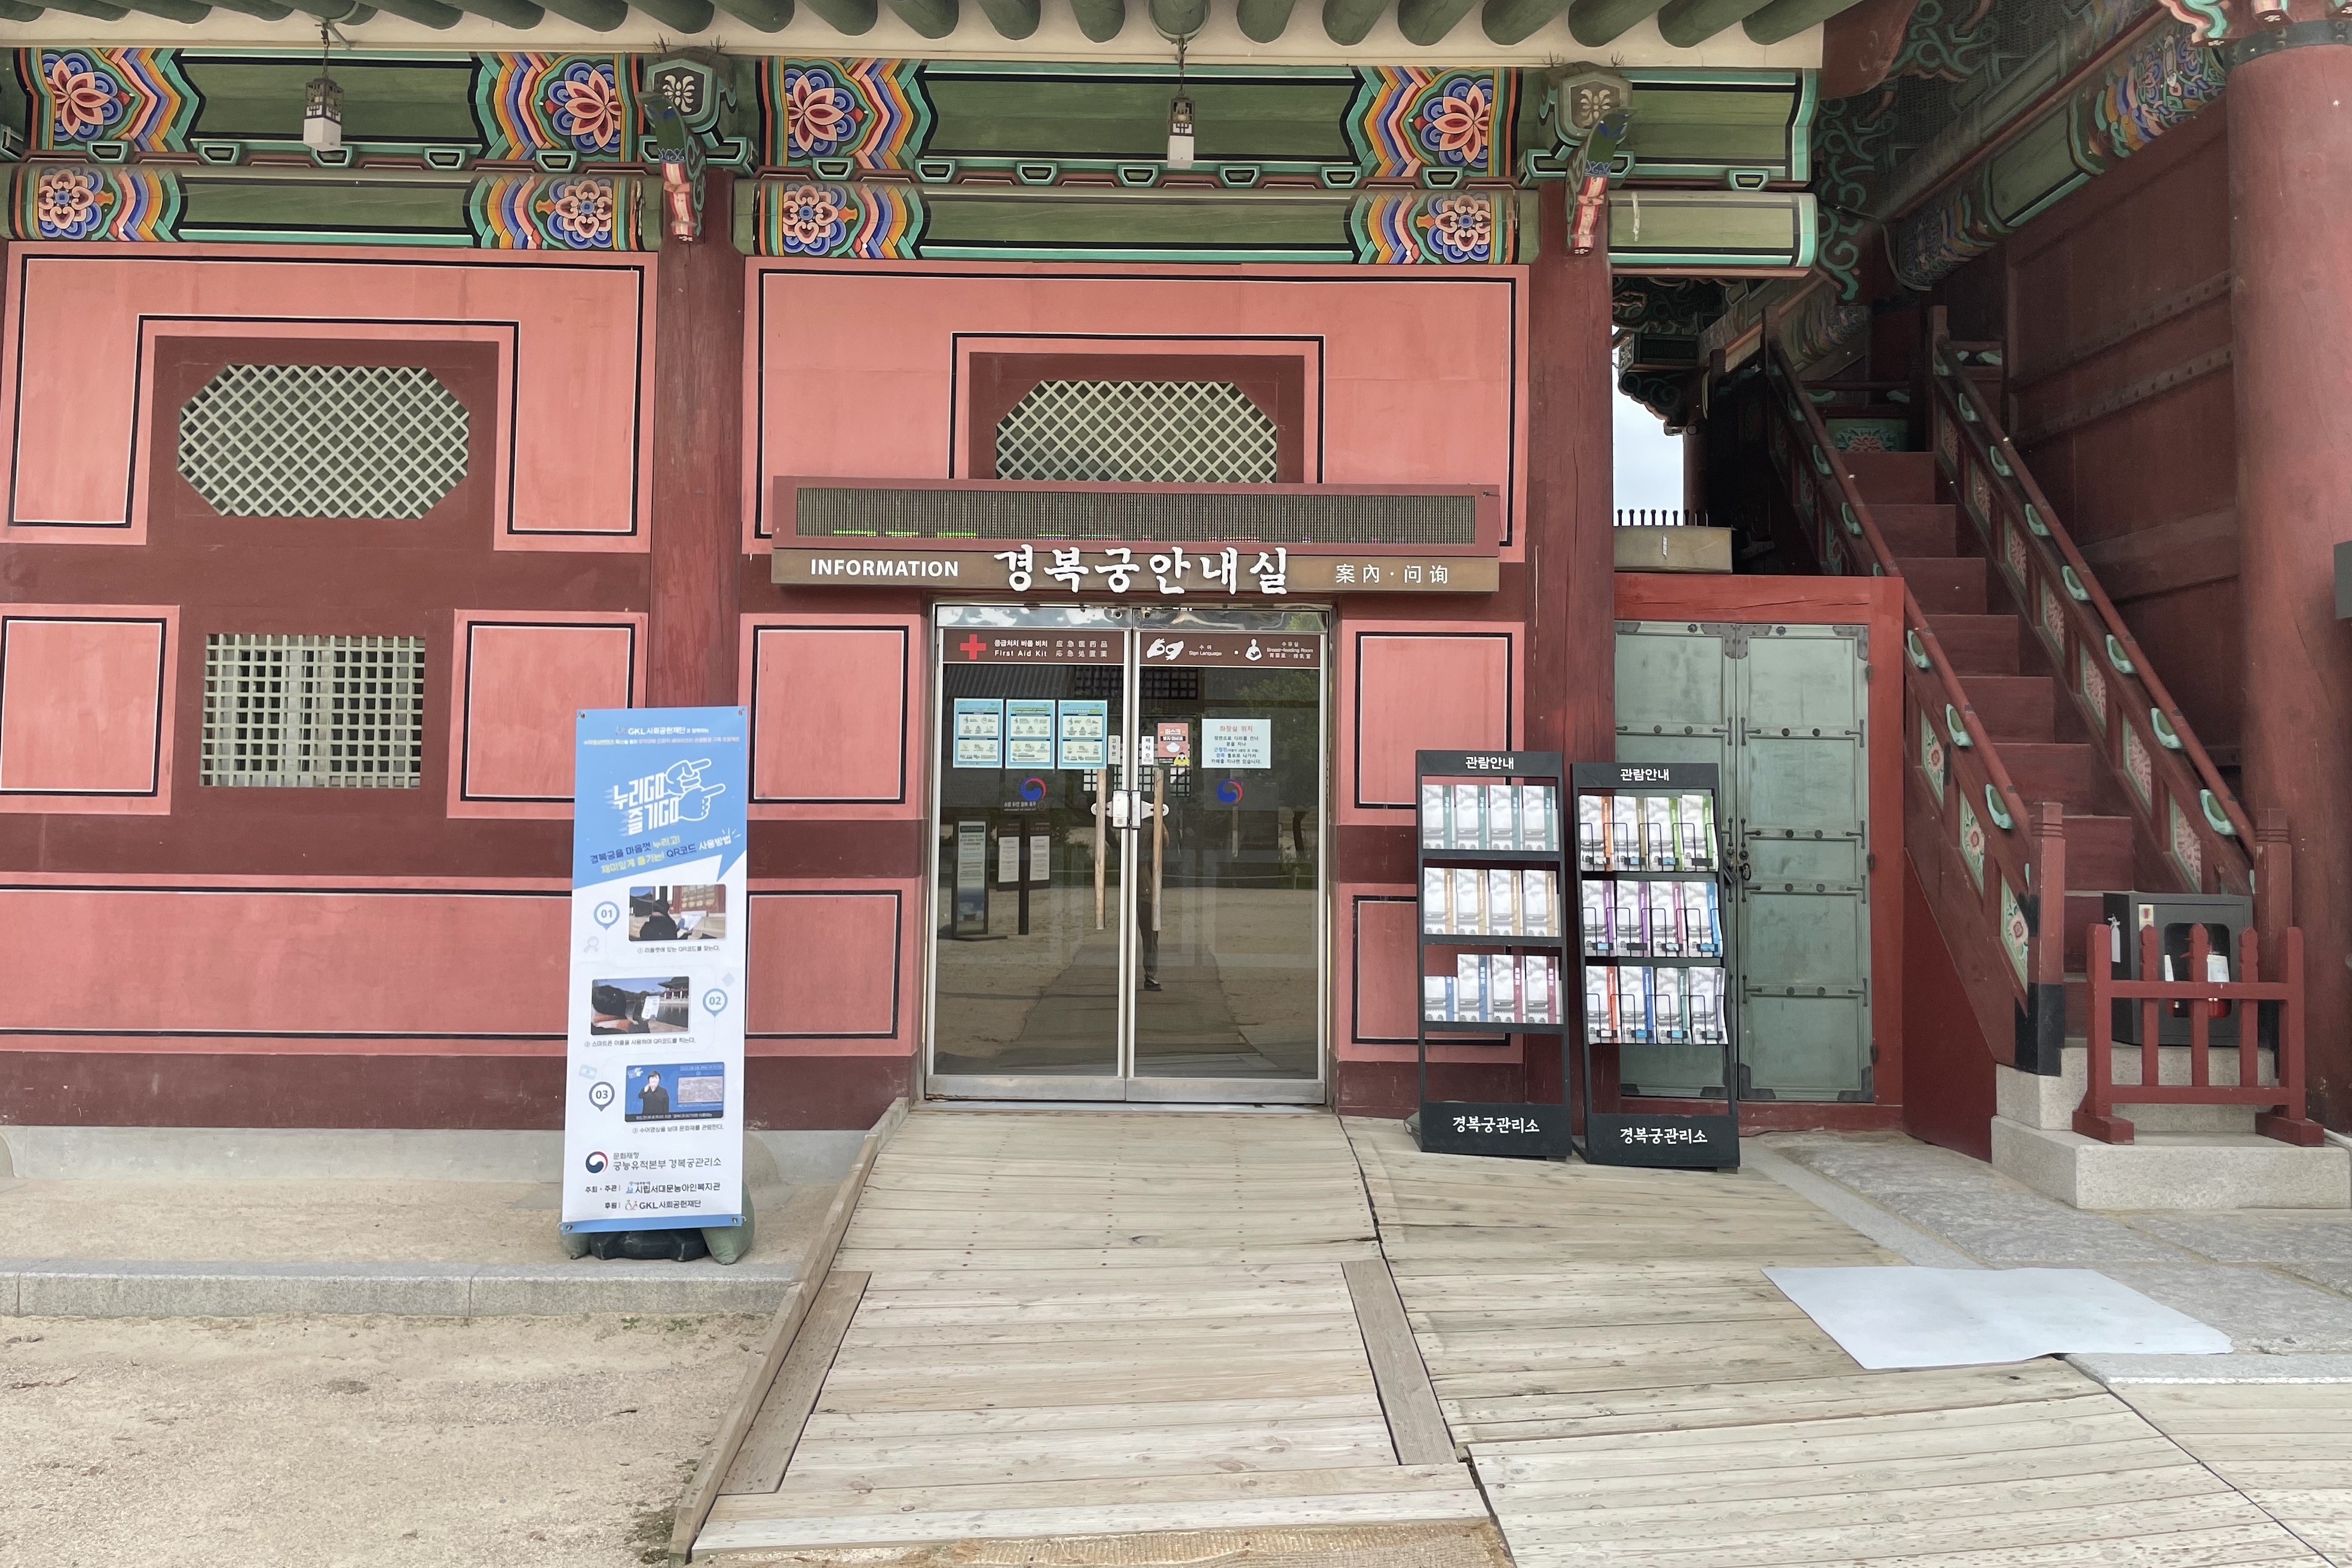 Guide map and information desk0 : Entrance of the information center at Gyeongbokgung Palace 
